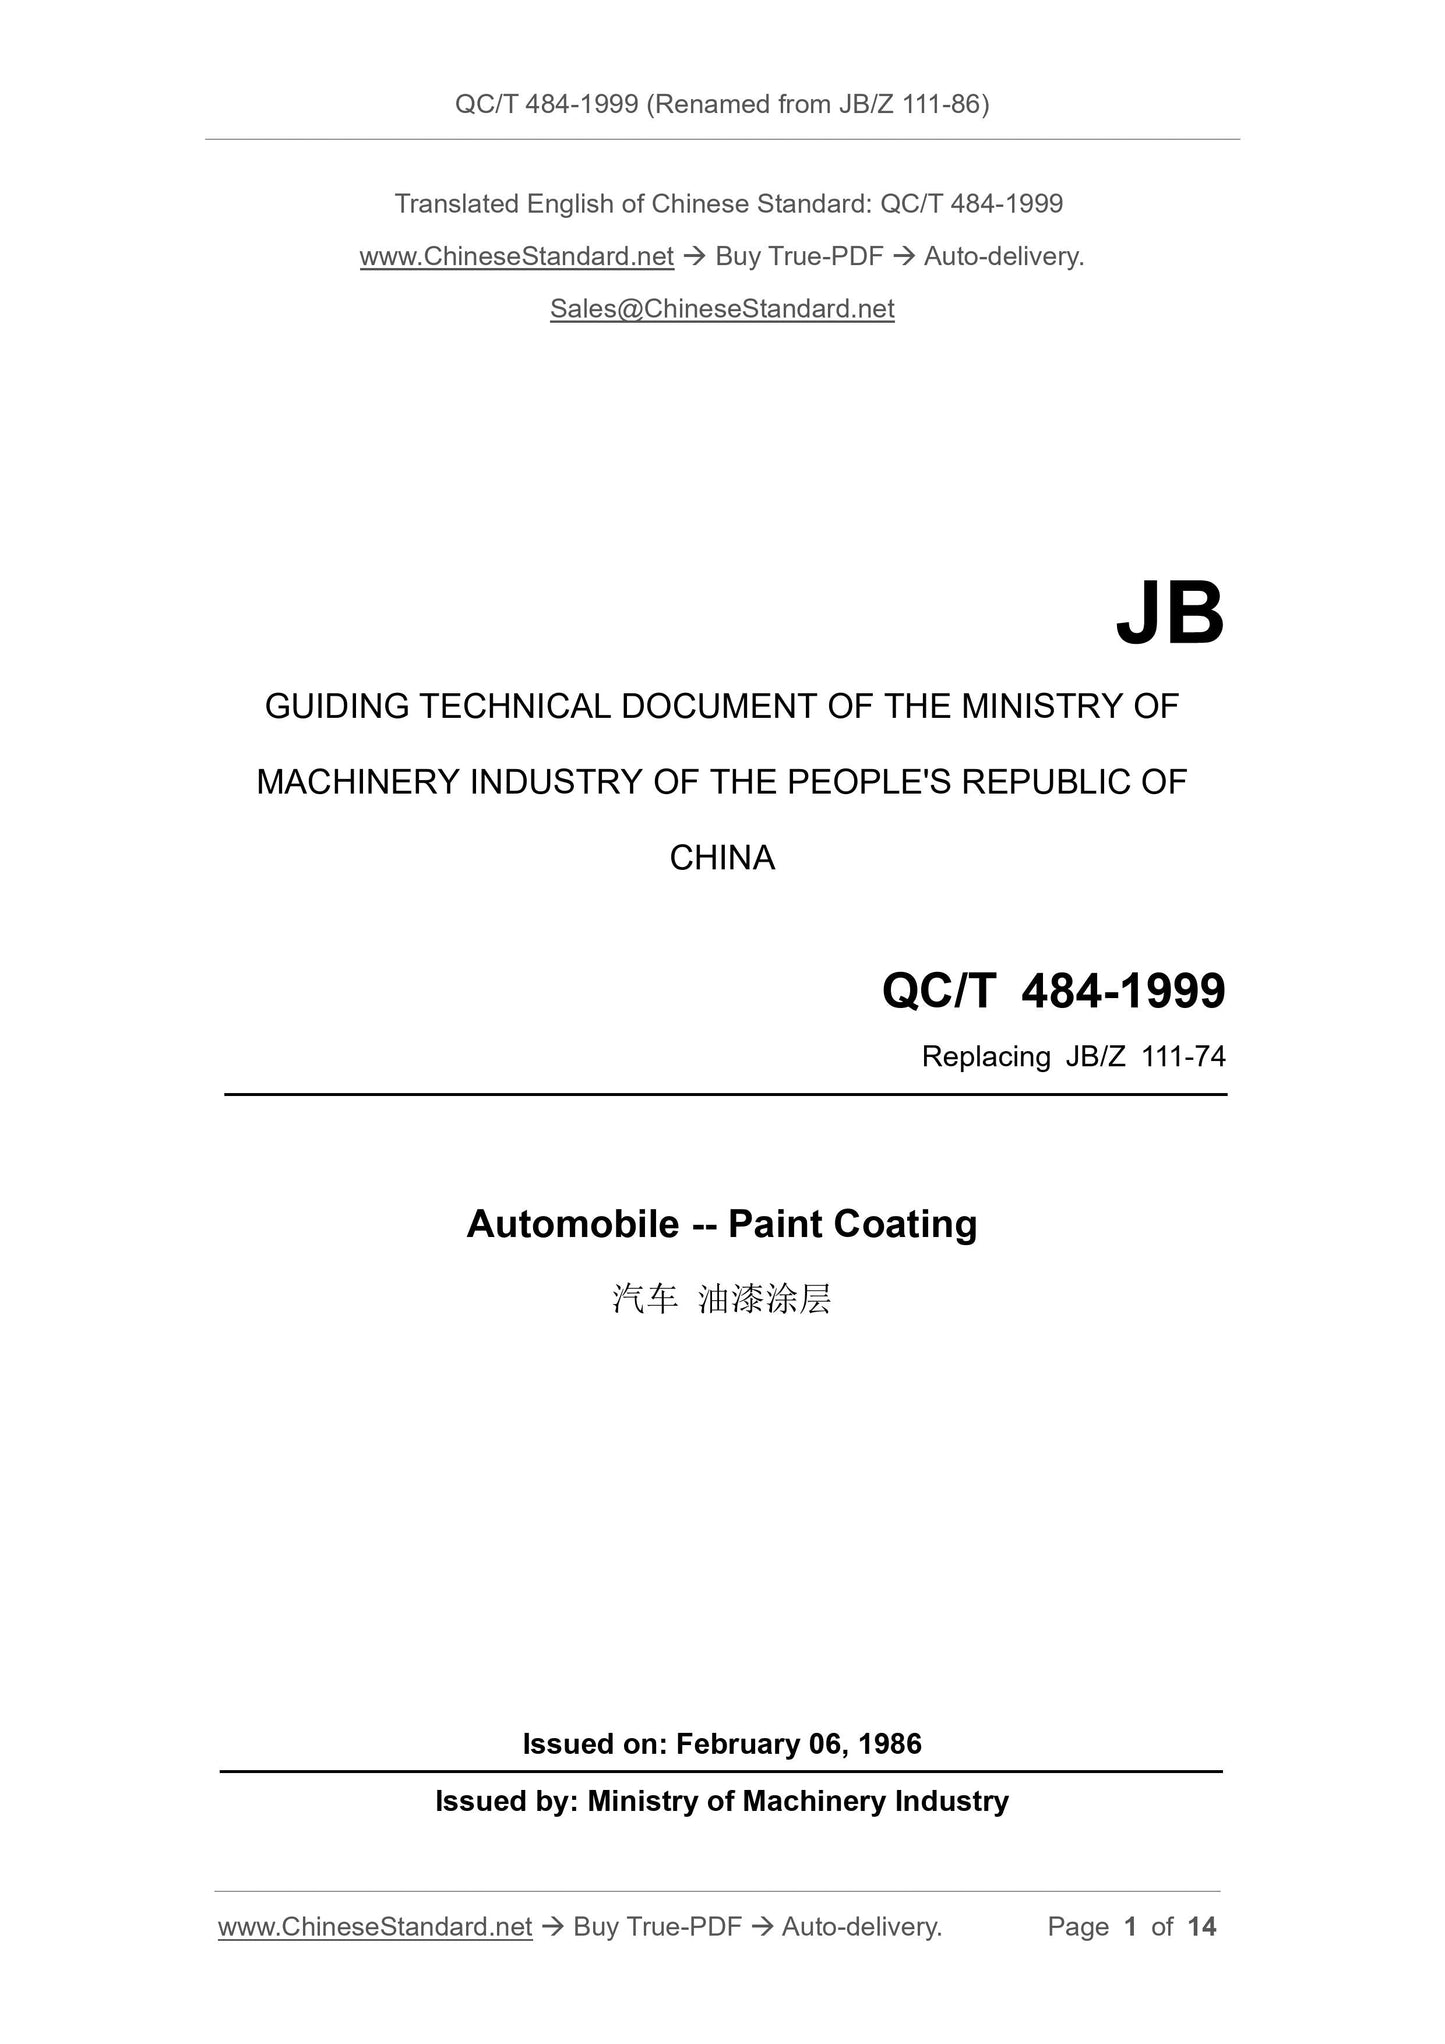 QC/T 484-1999 Page 1